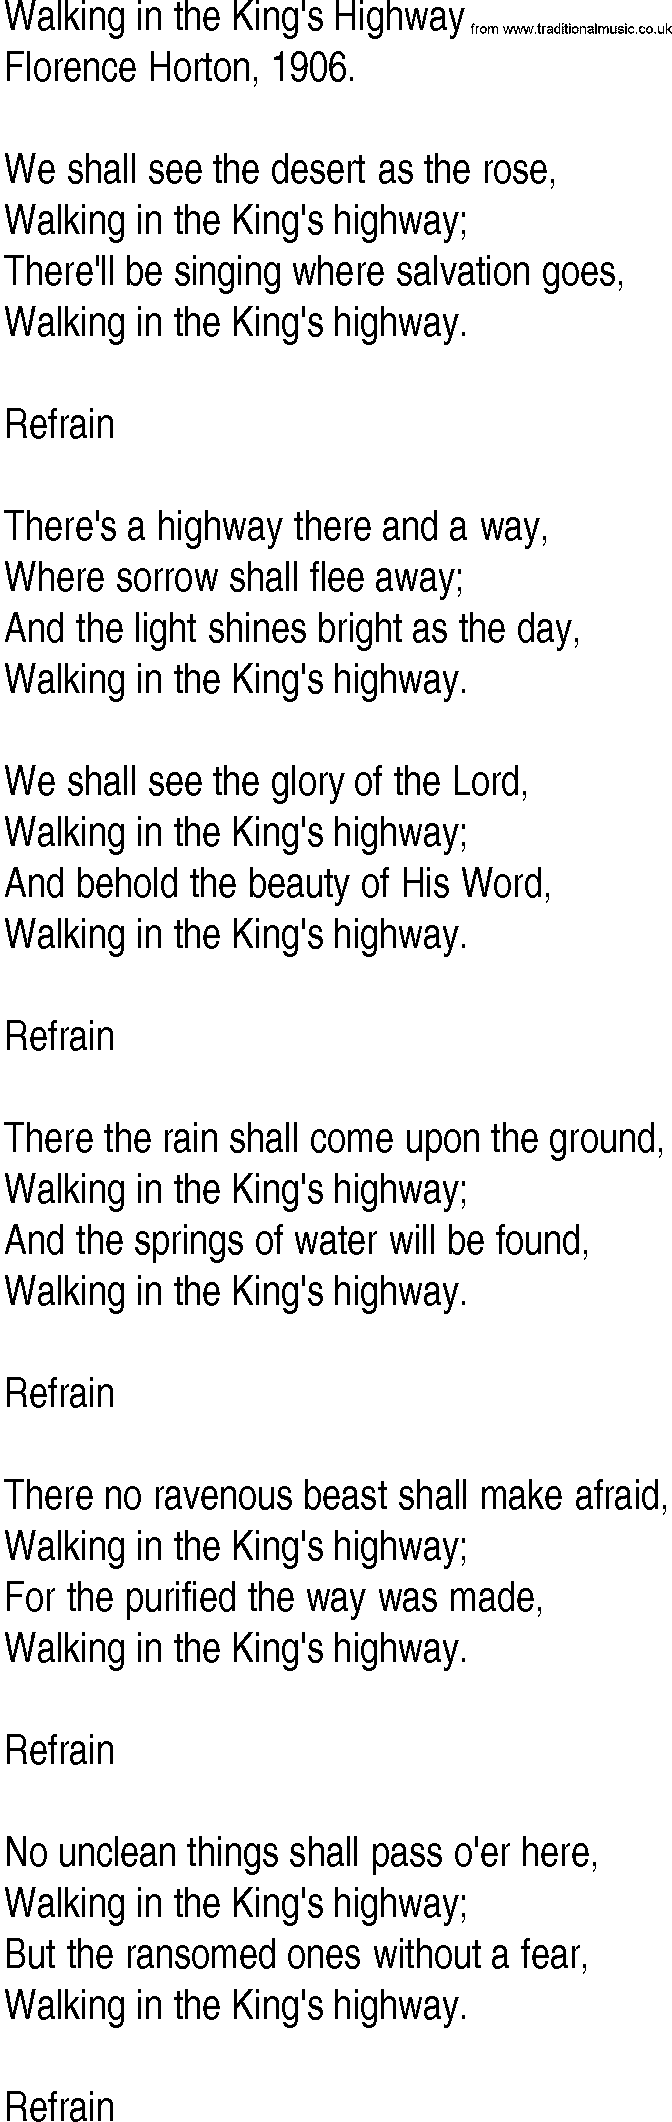 Hymn and Gospel Song: Walking in the King's Highway by Florence Horton lyrics